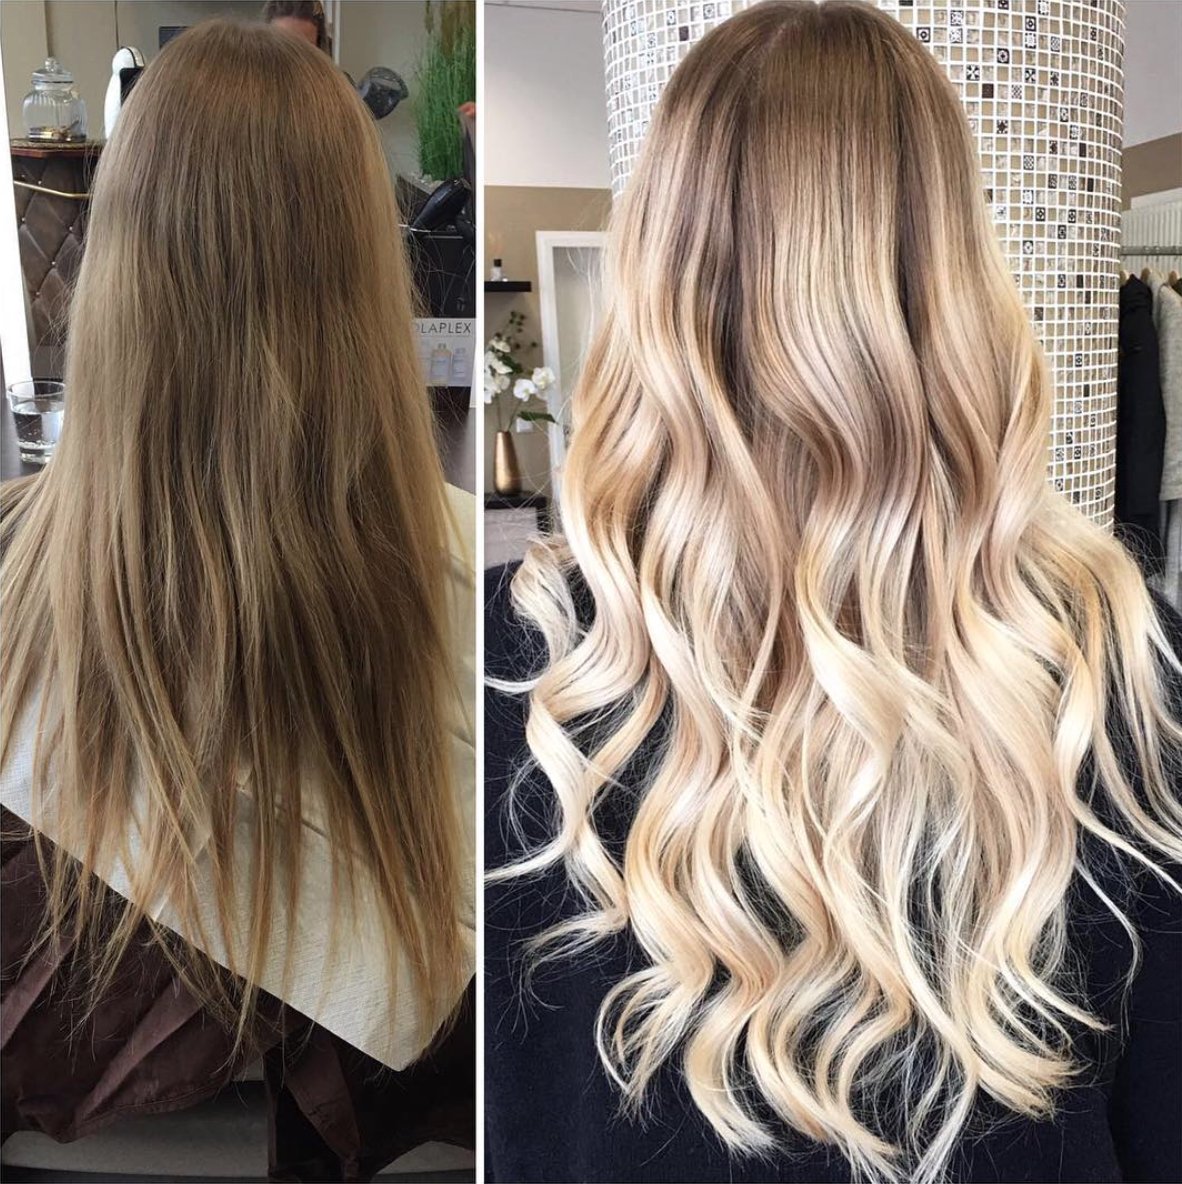 on Twitter: "Balayage highlights and extensions with Olaplex to keep the hair healthy. Color melina_best_friseur (on https://t.co/OfdgpP57Nz" / Twitter